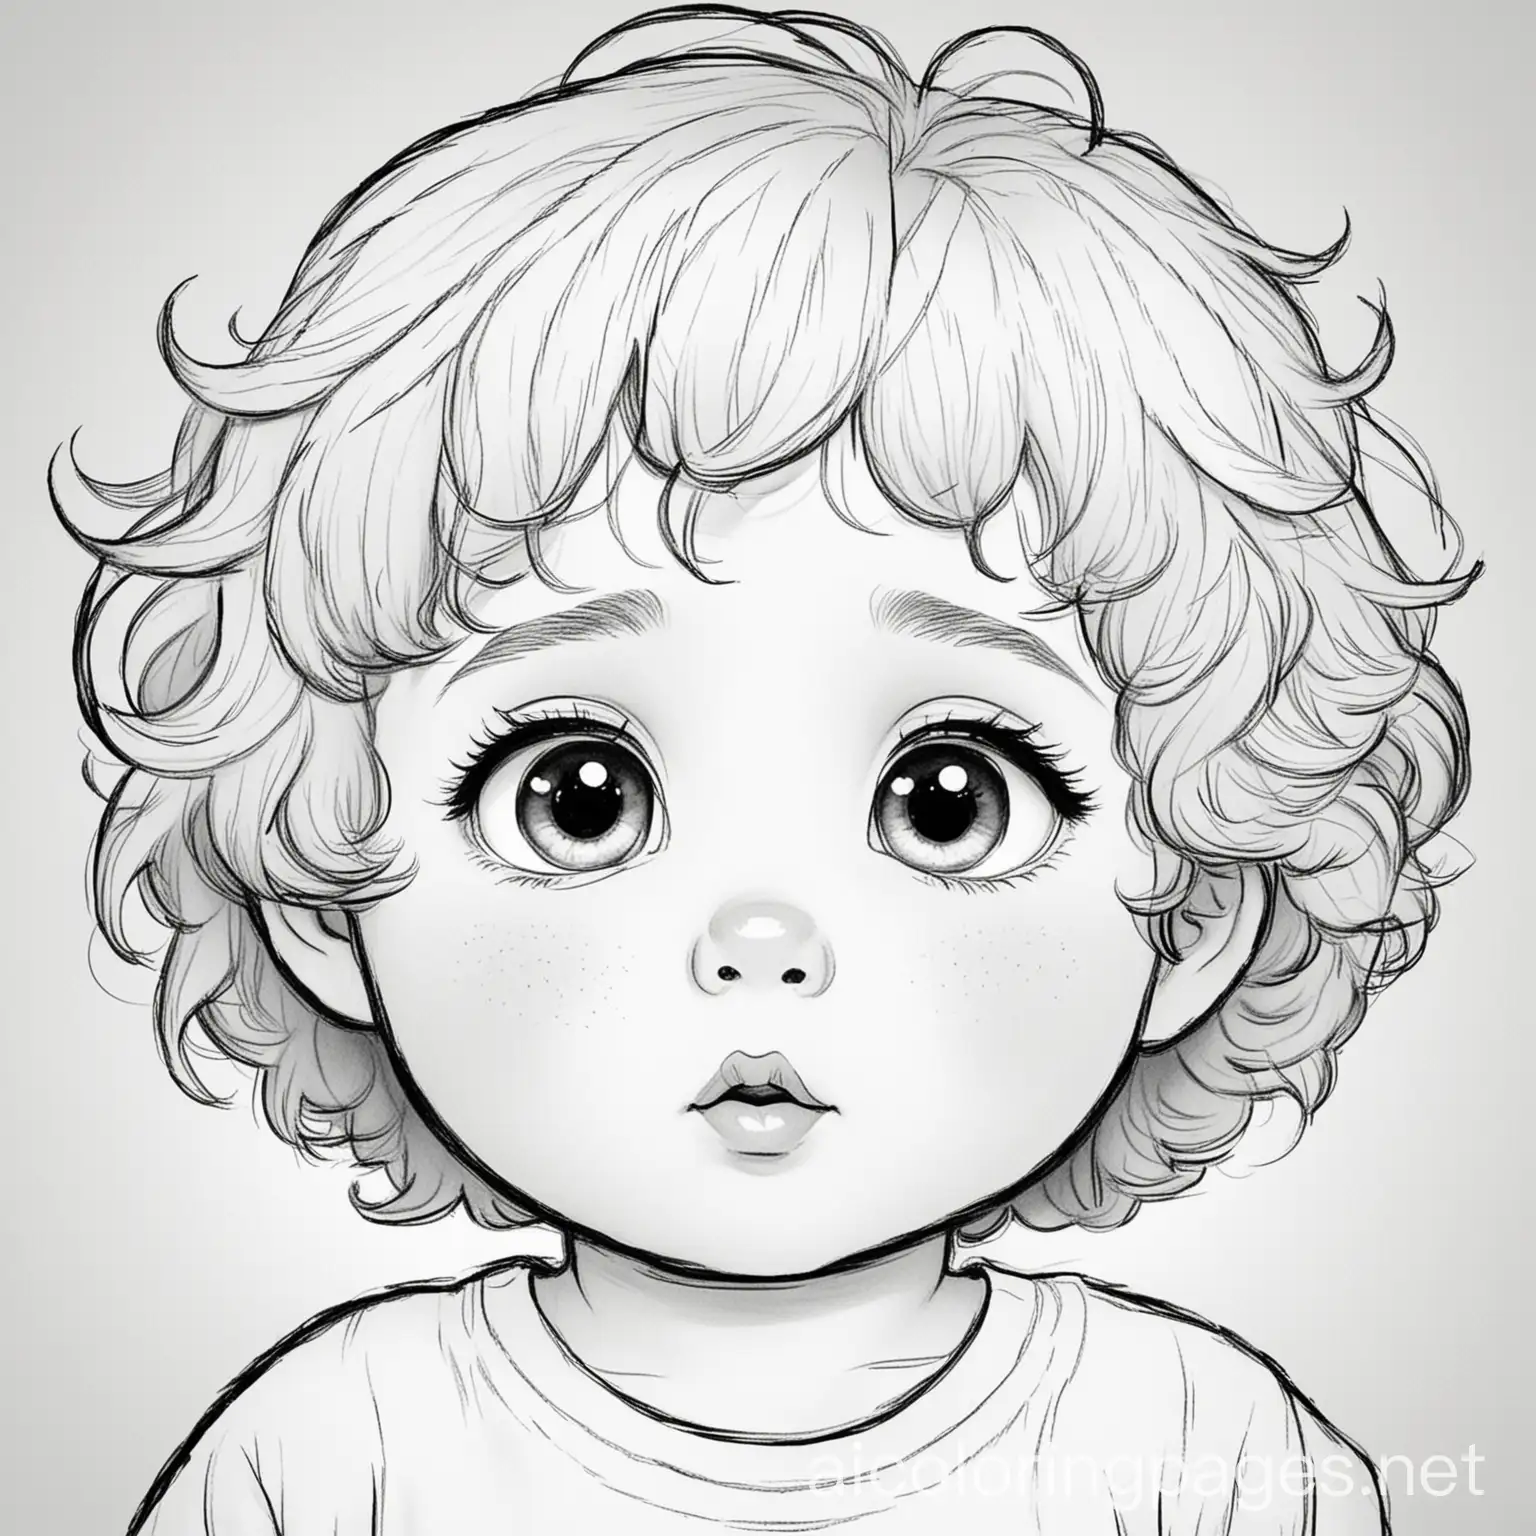 Baby boy with wavy hair and big eyes, and a chubby face, Coloring Page, black and white, line art, white background, Simplicity, Ample White Space. The background of the coloring page is plain white to make it easy for young children to color within the lines. The outlines of all the subjects are easy to distinguish, making it simple for kids to color without too much difficulty